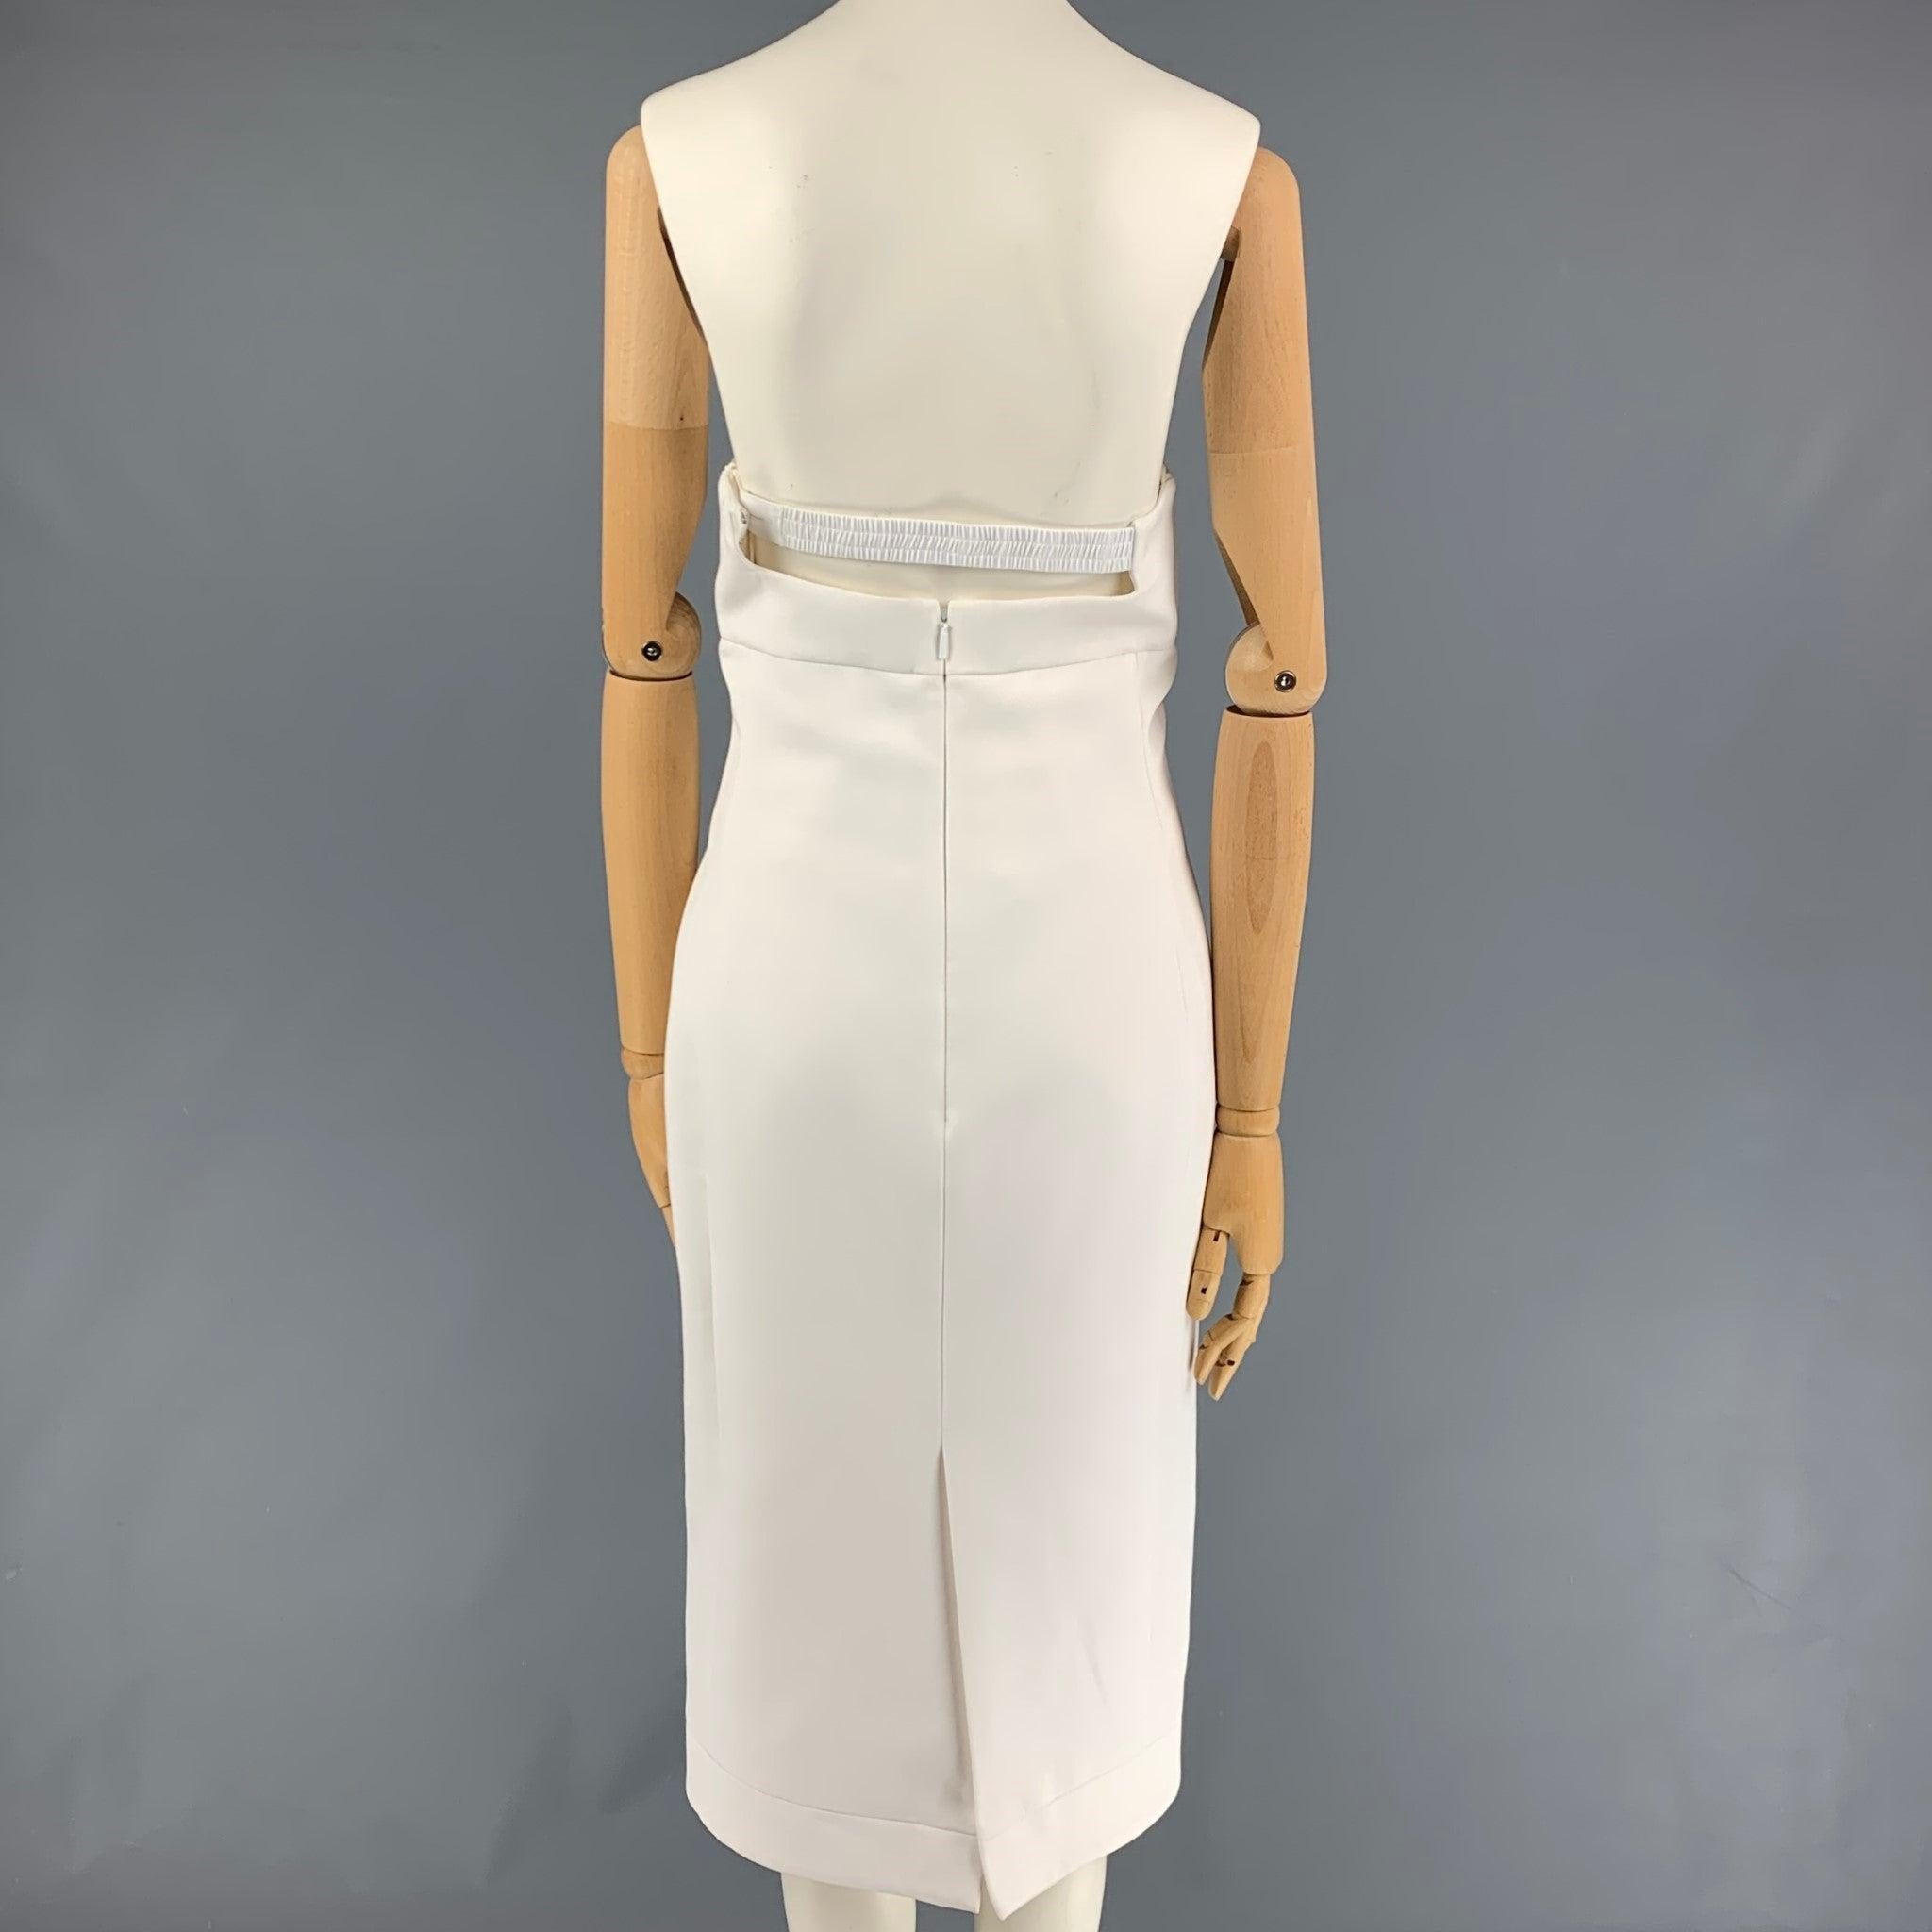 SAINT LAURENT Size 4 White Viscose Strapless Cutout Cocktail Dress In Good Condition For Sale In San Francisco, CA